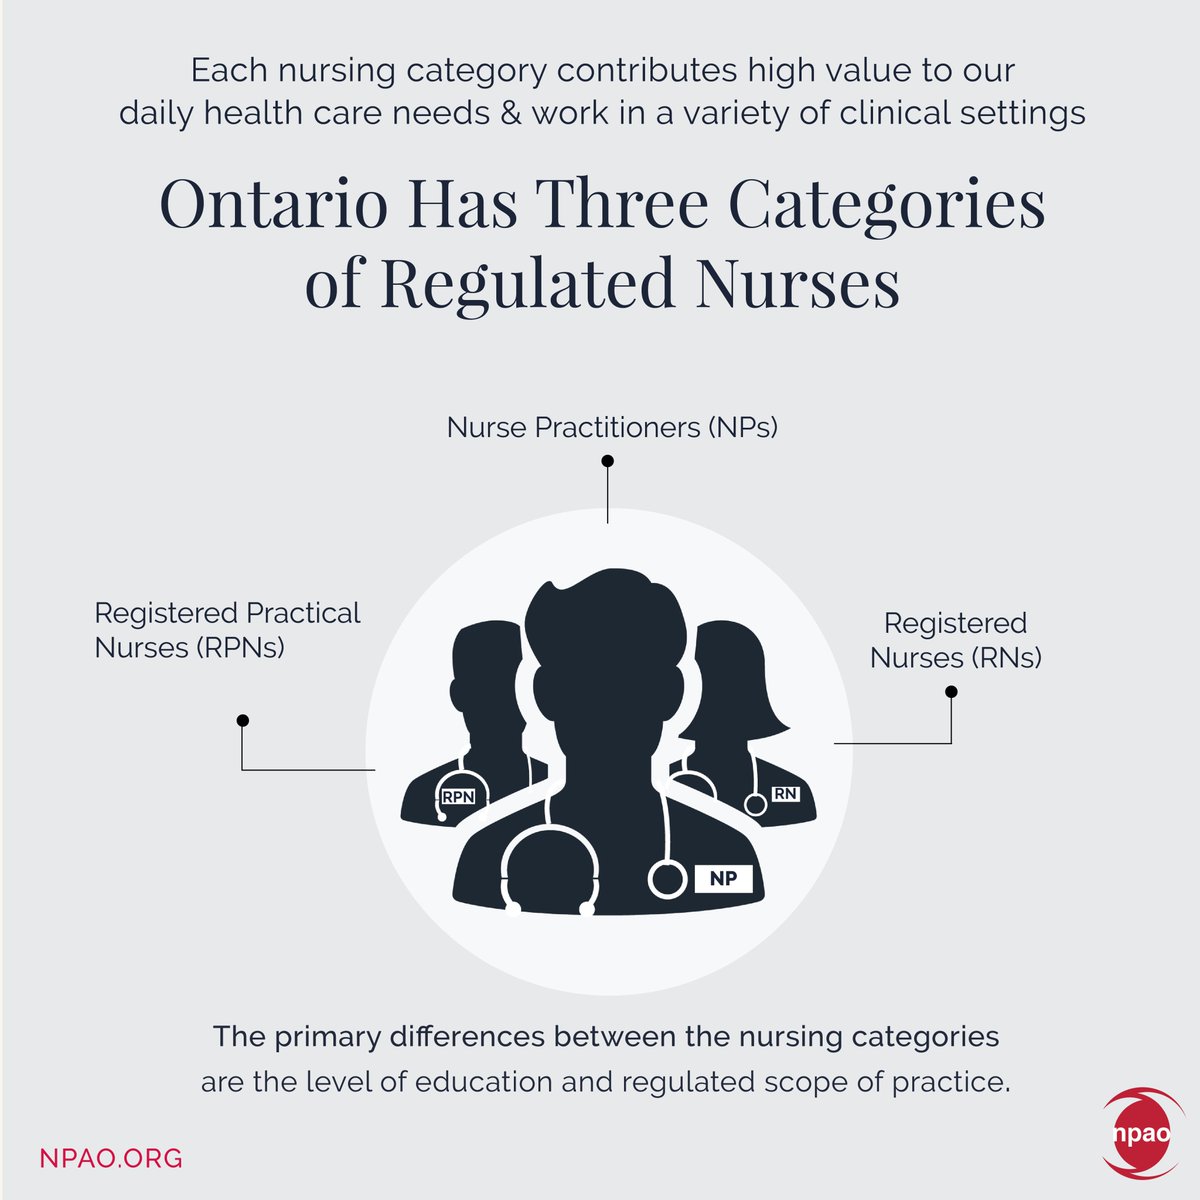 Each nursing category contributes high value to our daily healthcare needs and work in a variety of clinical settings. The primary differences between the nursing categories are the level of education and the regulated scope of practice. Learn more at npao.org